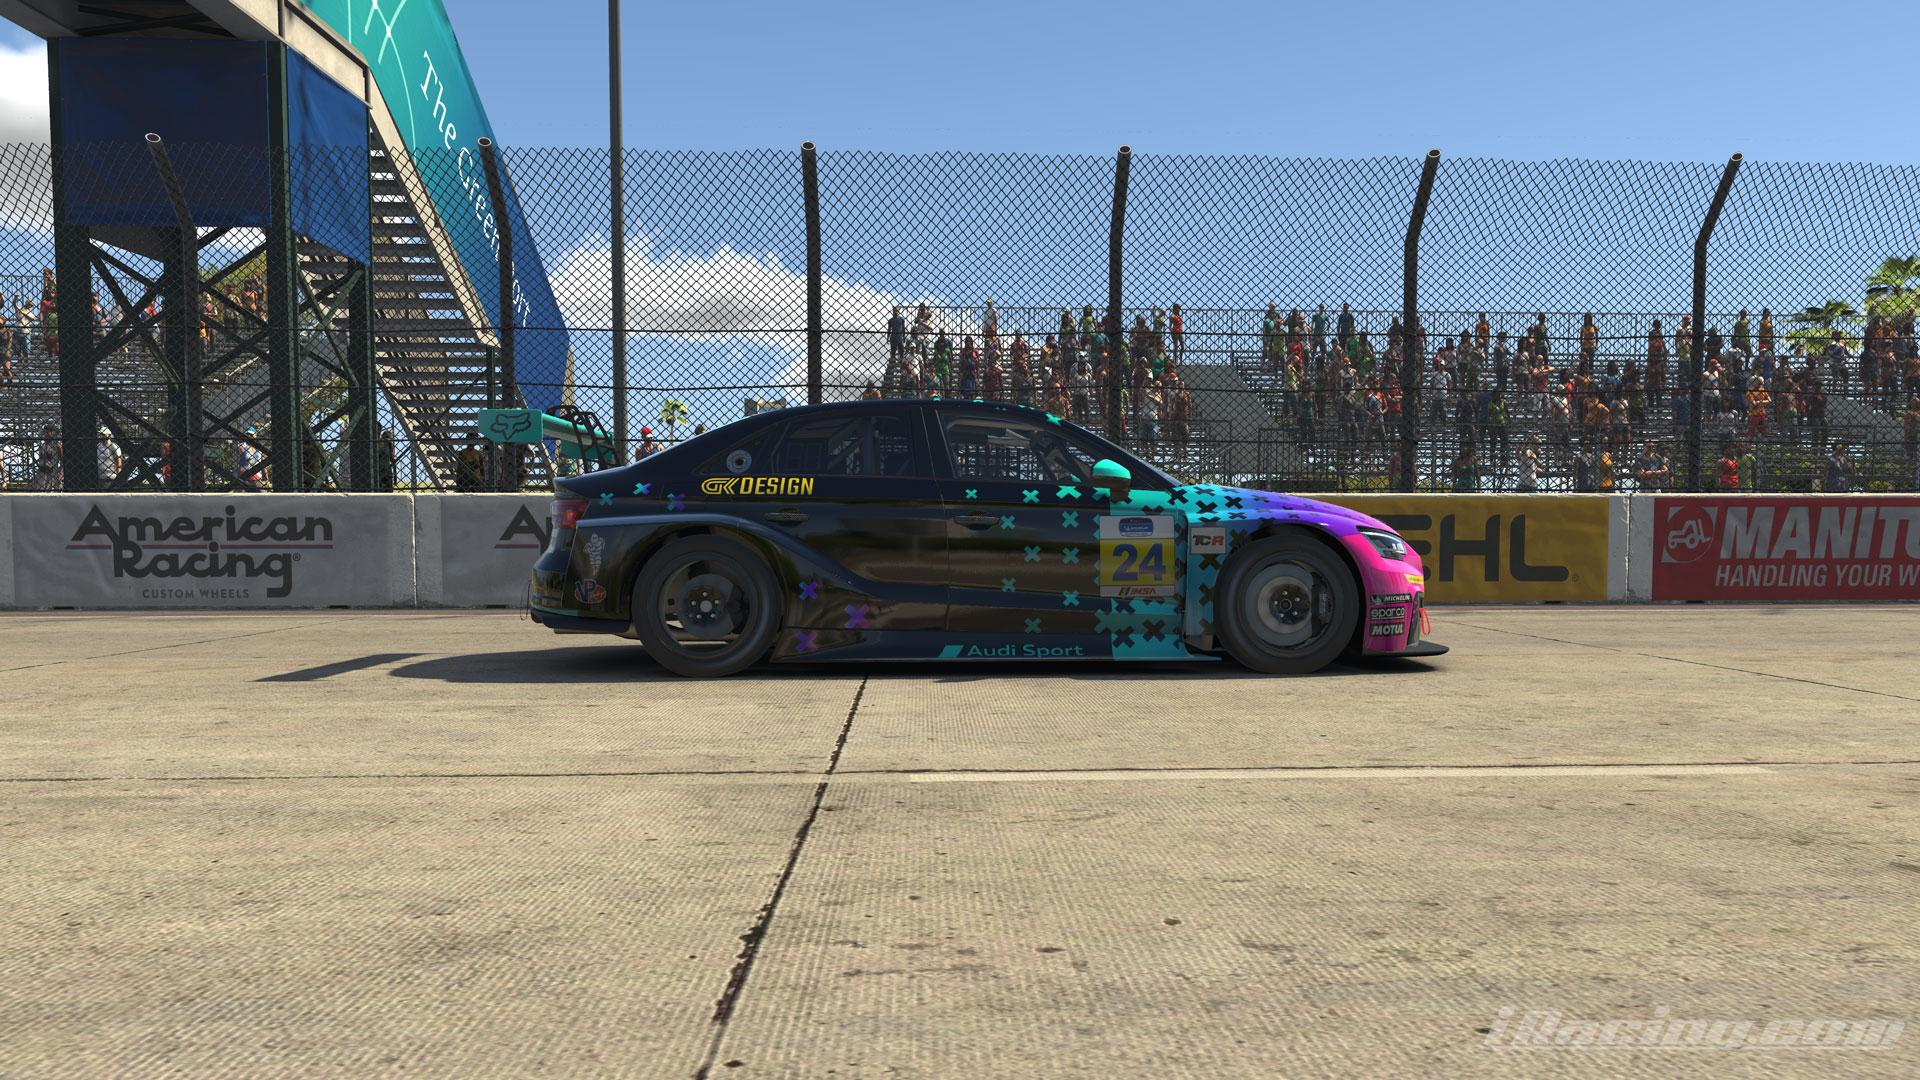 Preview of Unicorn Slush X Livery - Audi RS 3 LMS by Gino Kelleners